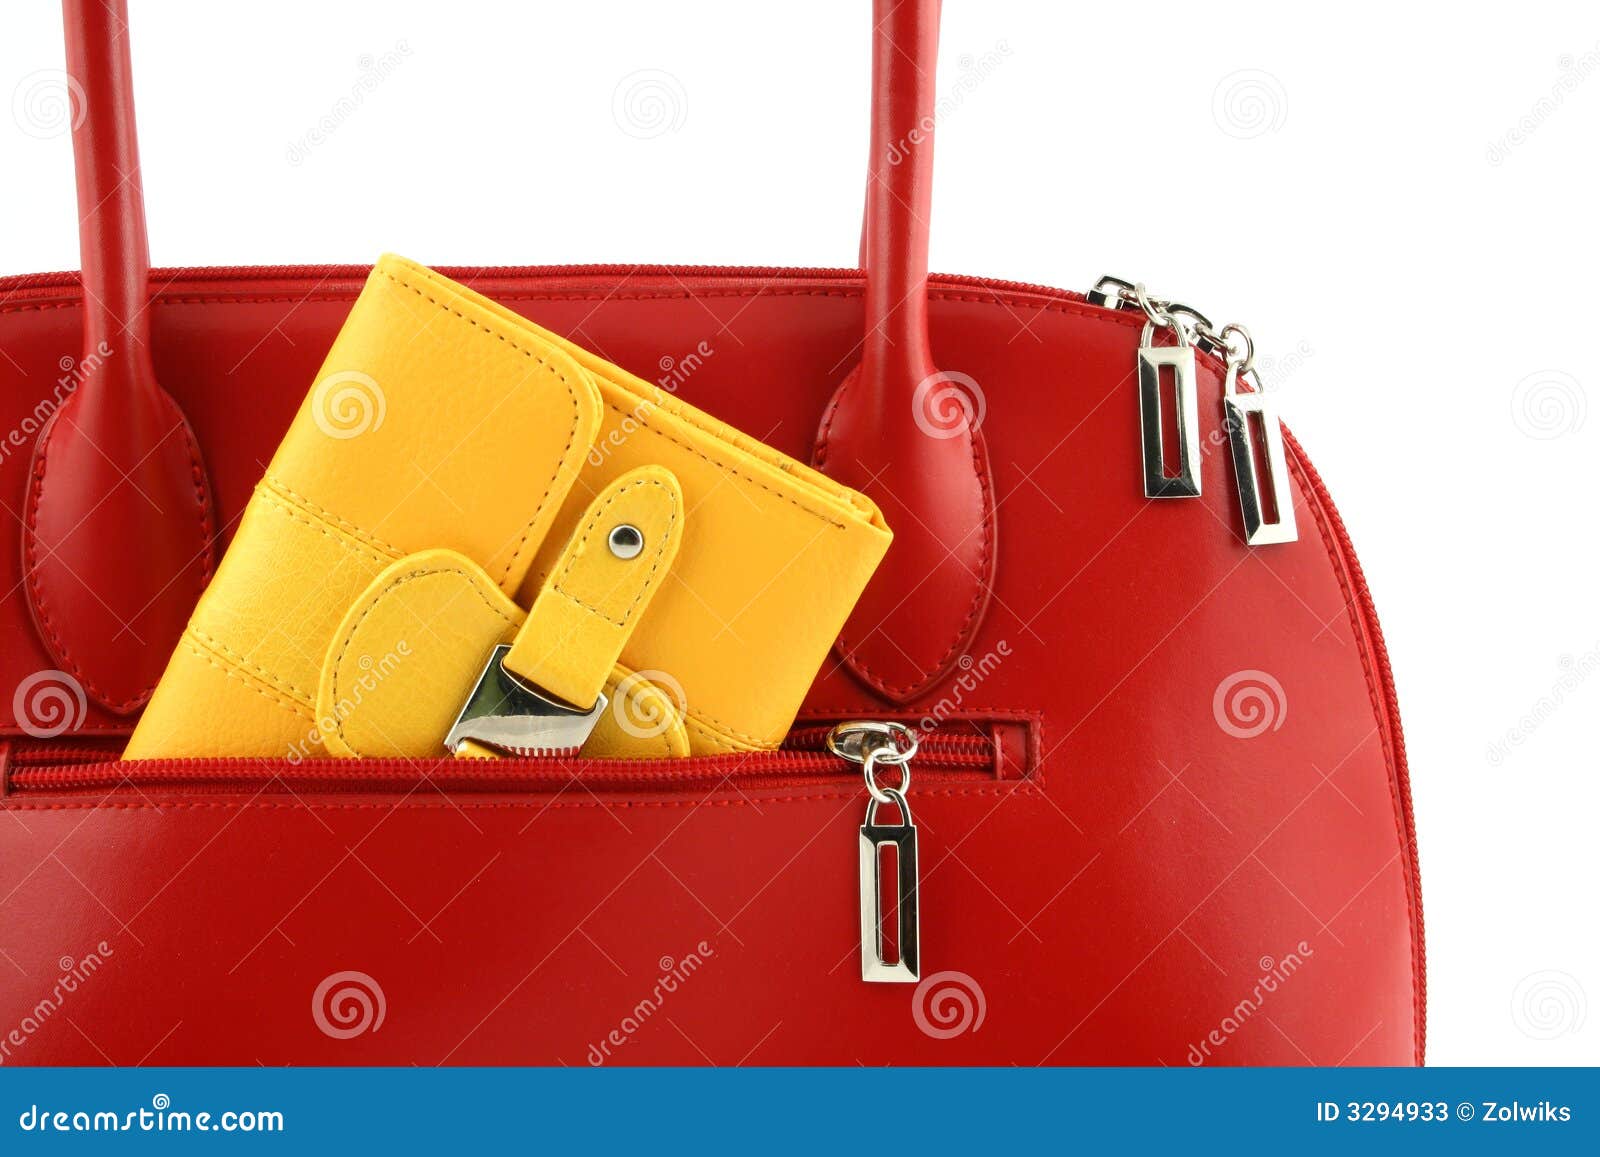 Wallet in a pocket stock image. Image of woman, zipper - 3294933